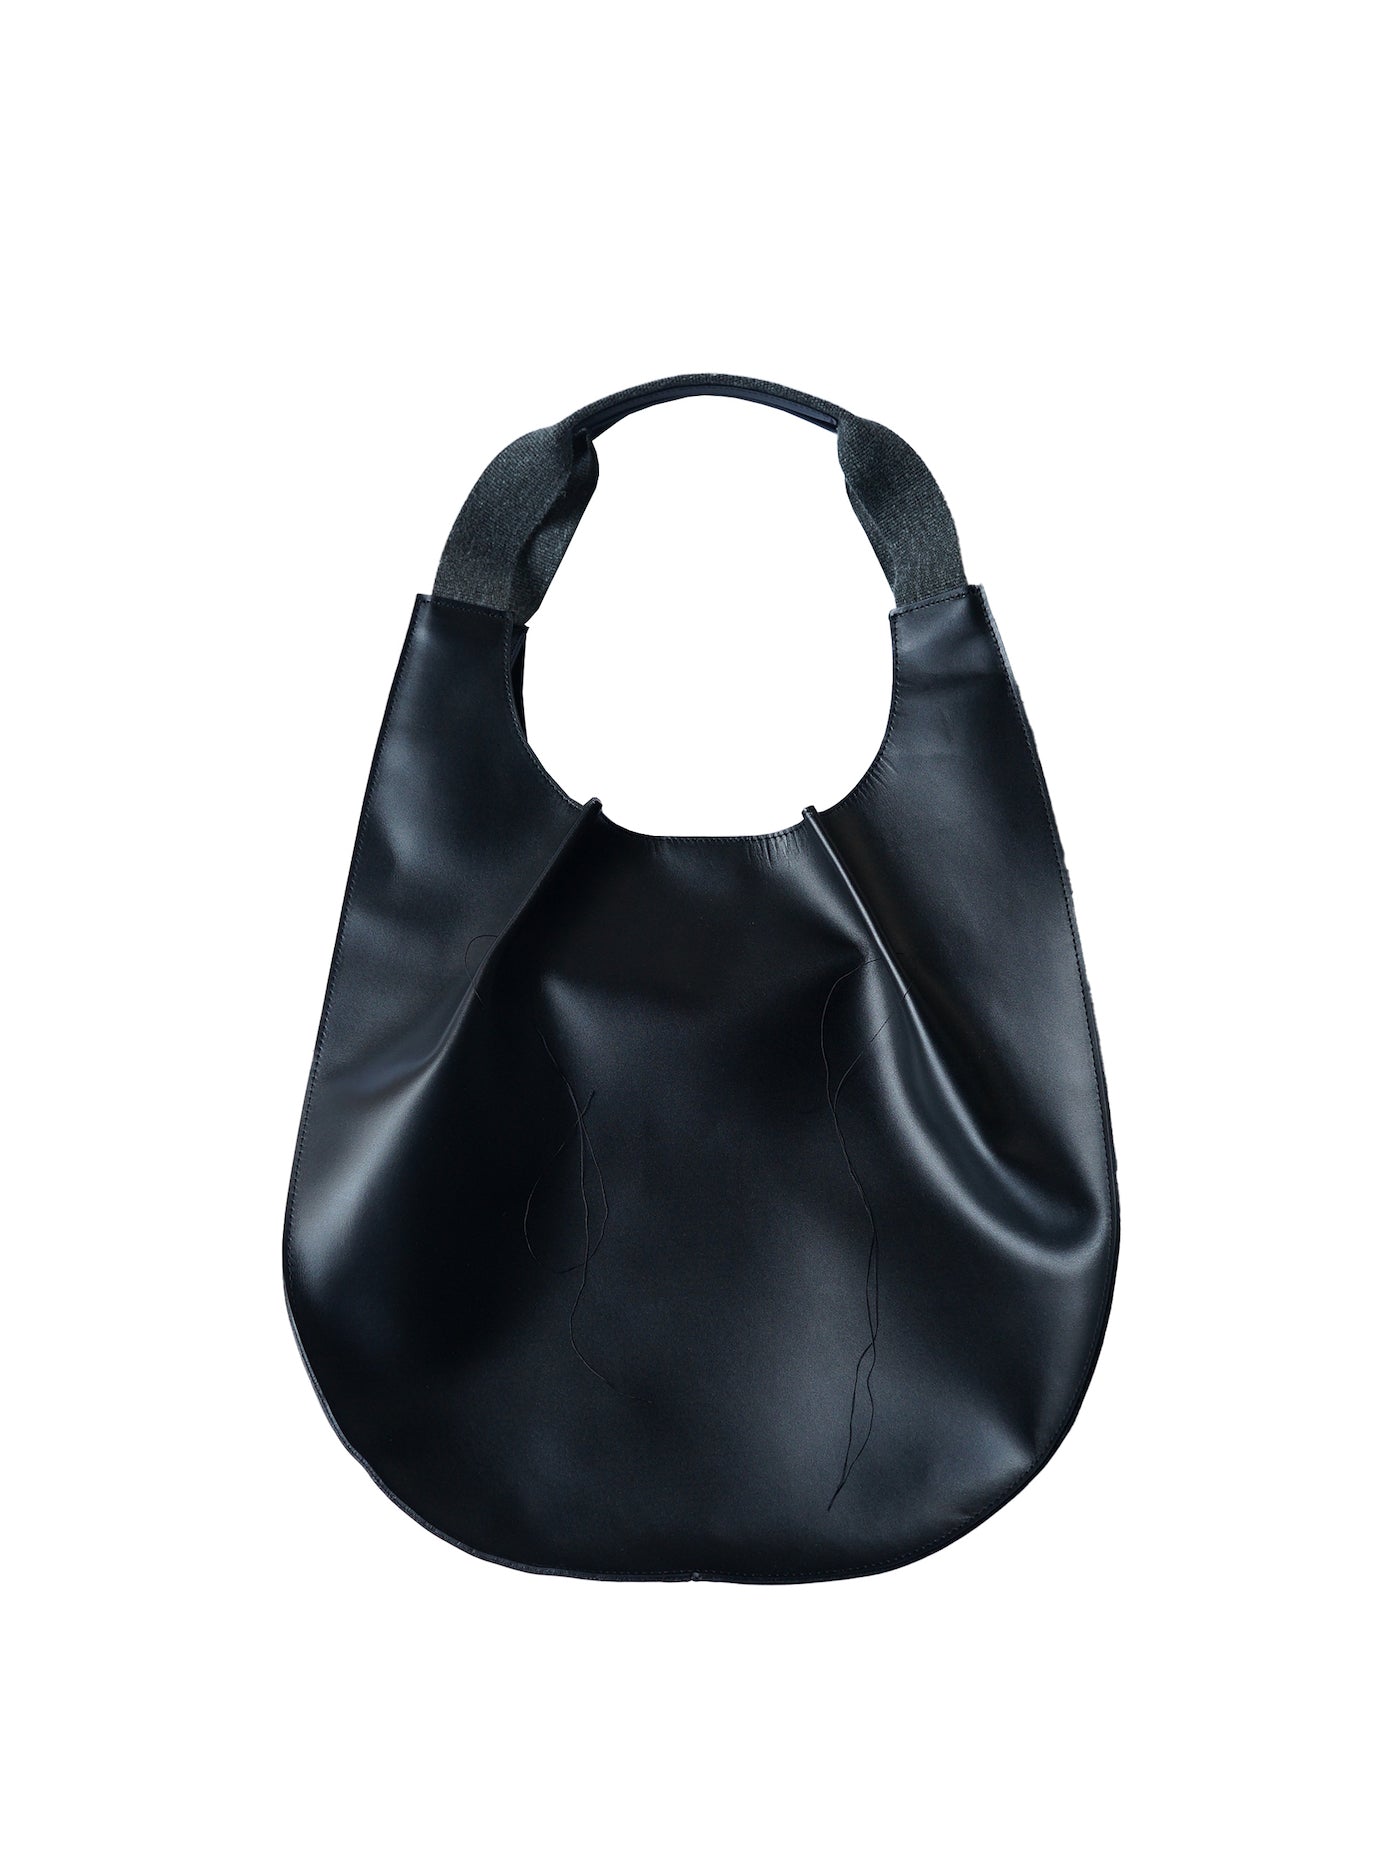 RICH I CIRCLE LEATHER HANDLE BAG - バッグ